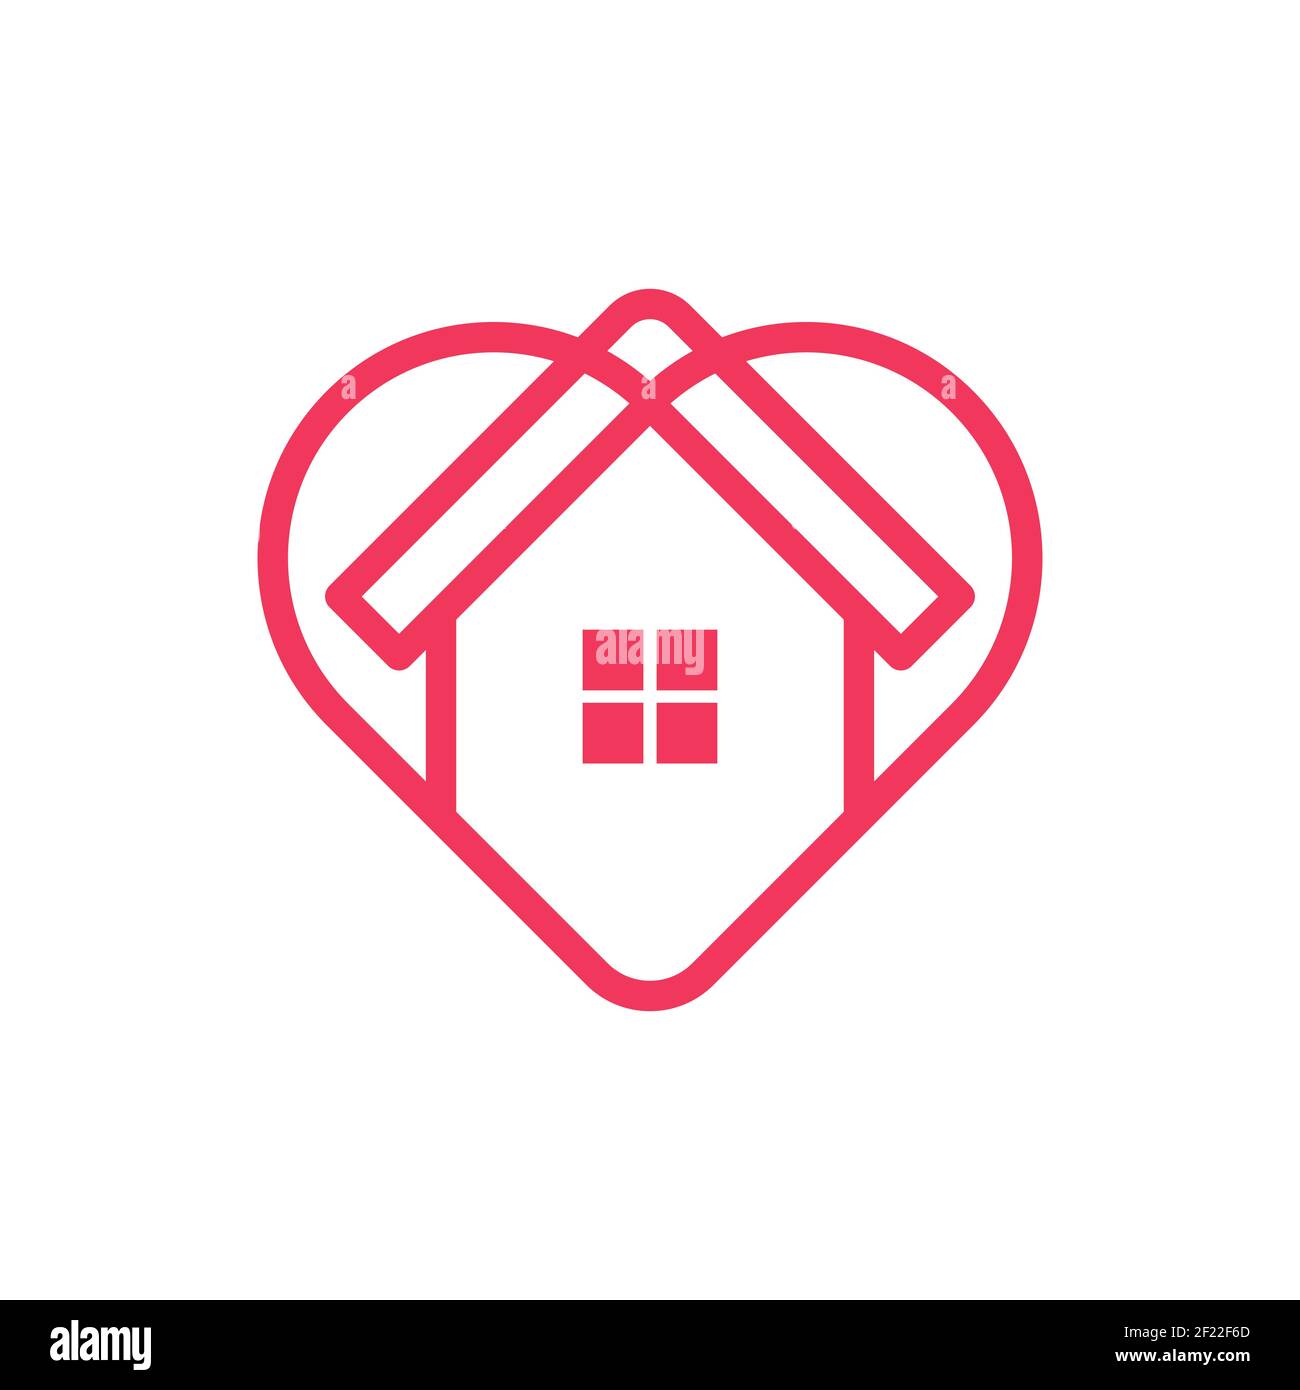 Stay at Home Logo Icon Vector design illustration. Home with Love icon design concept. Home with heart shape icons shows messages 'stay home' or 'stay Stock Vector